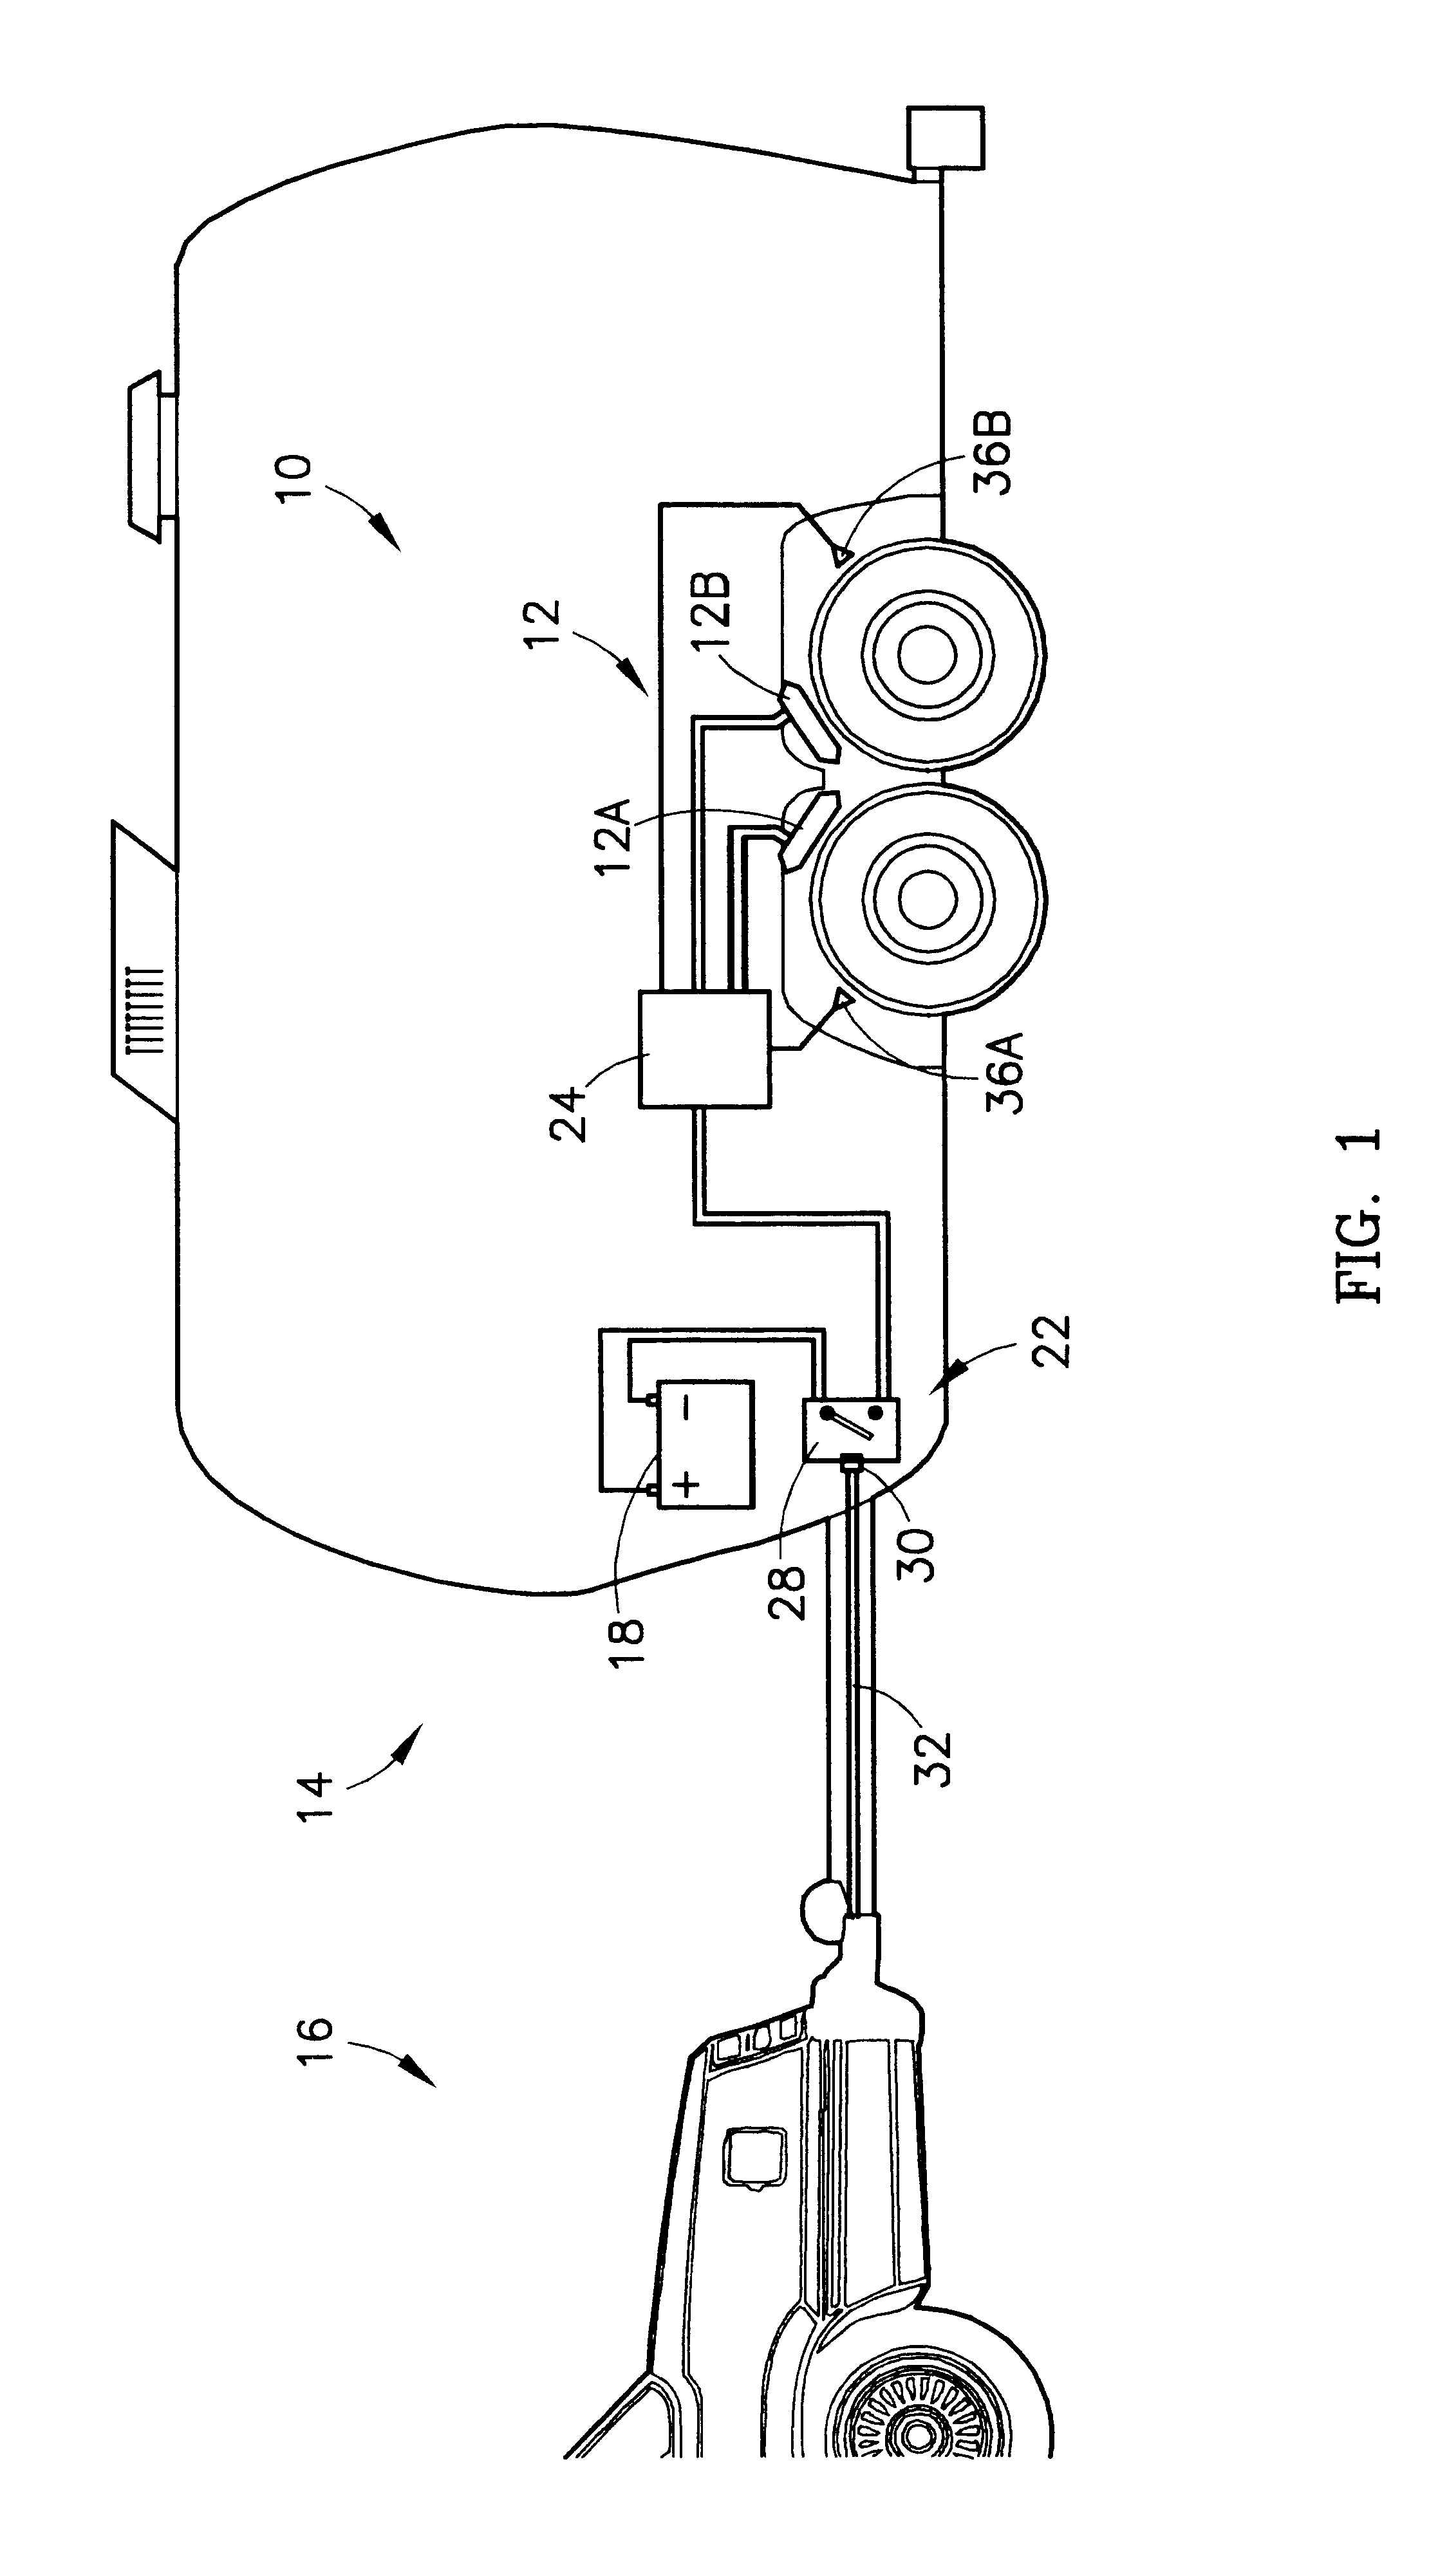 System and method for managing electric brakes